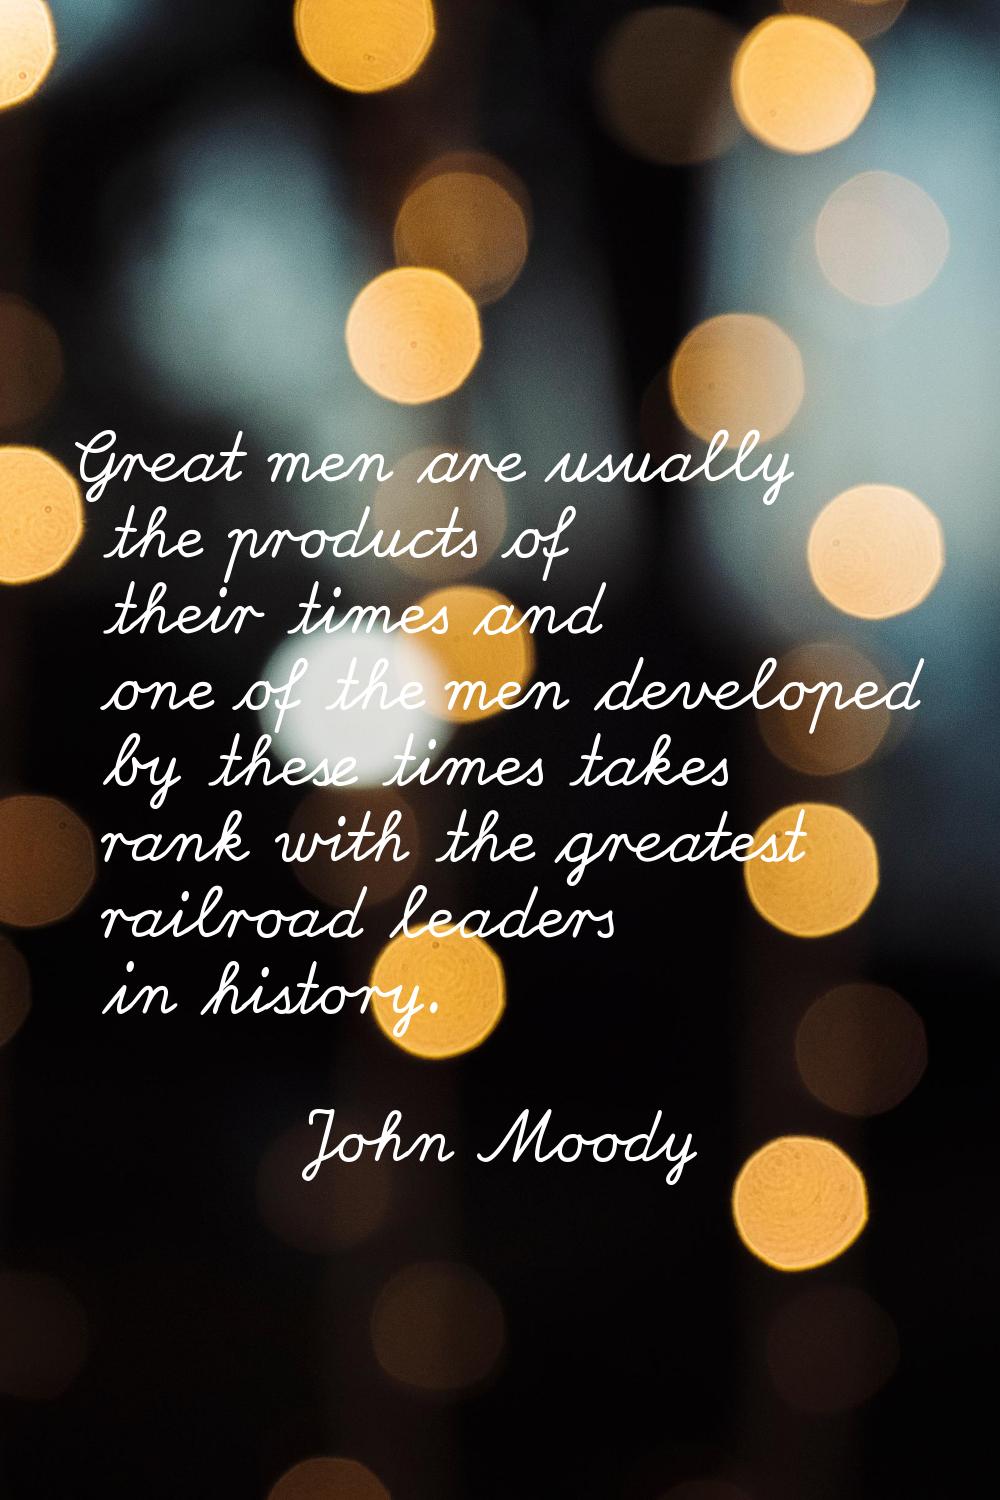 Great men are usually the products of their times and one of the men developed by these times takes